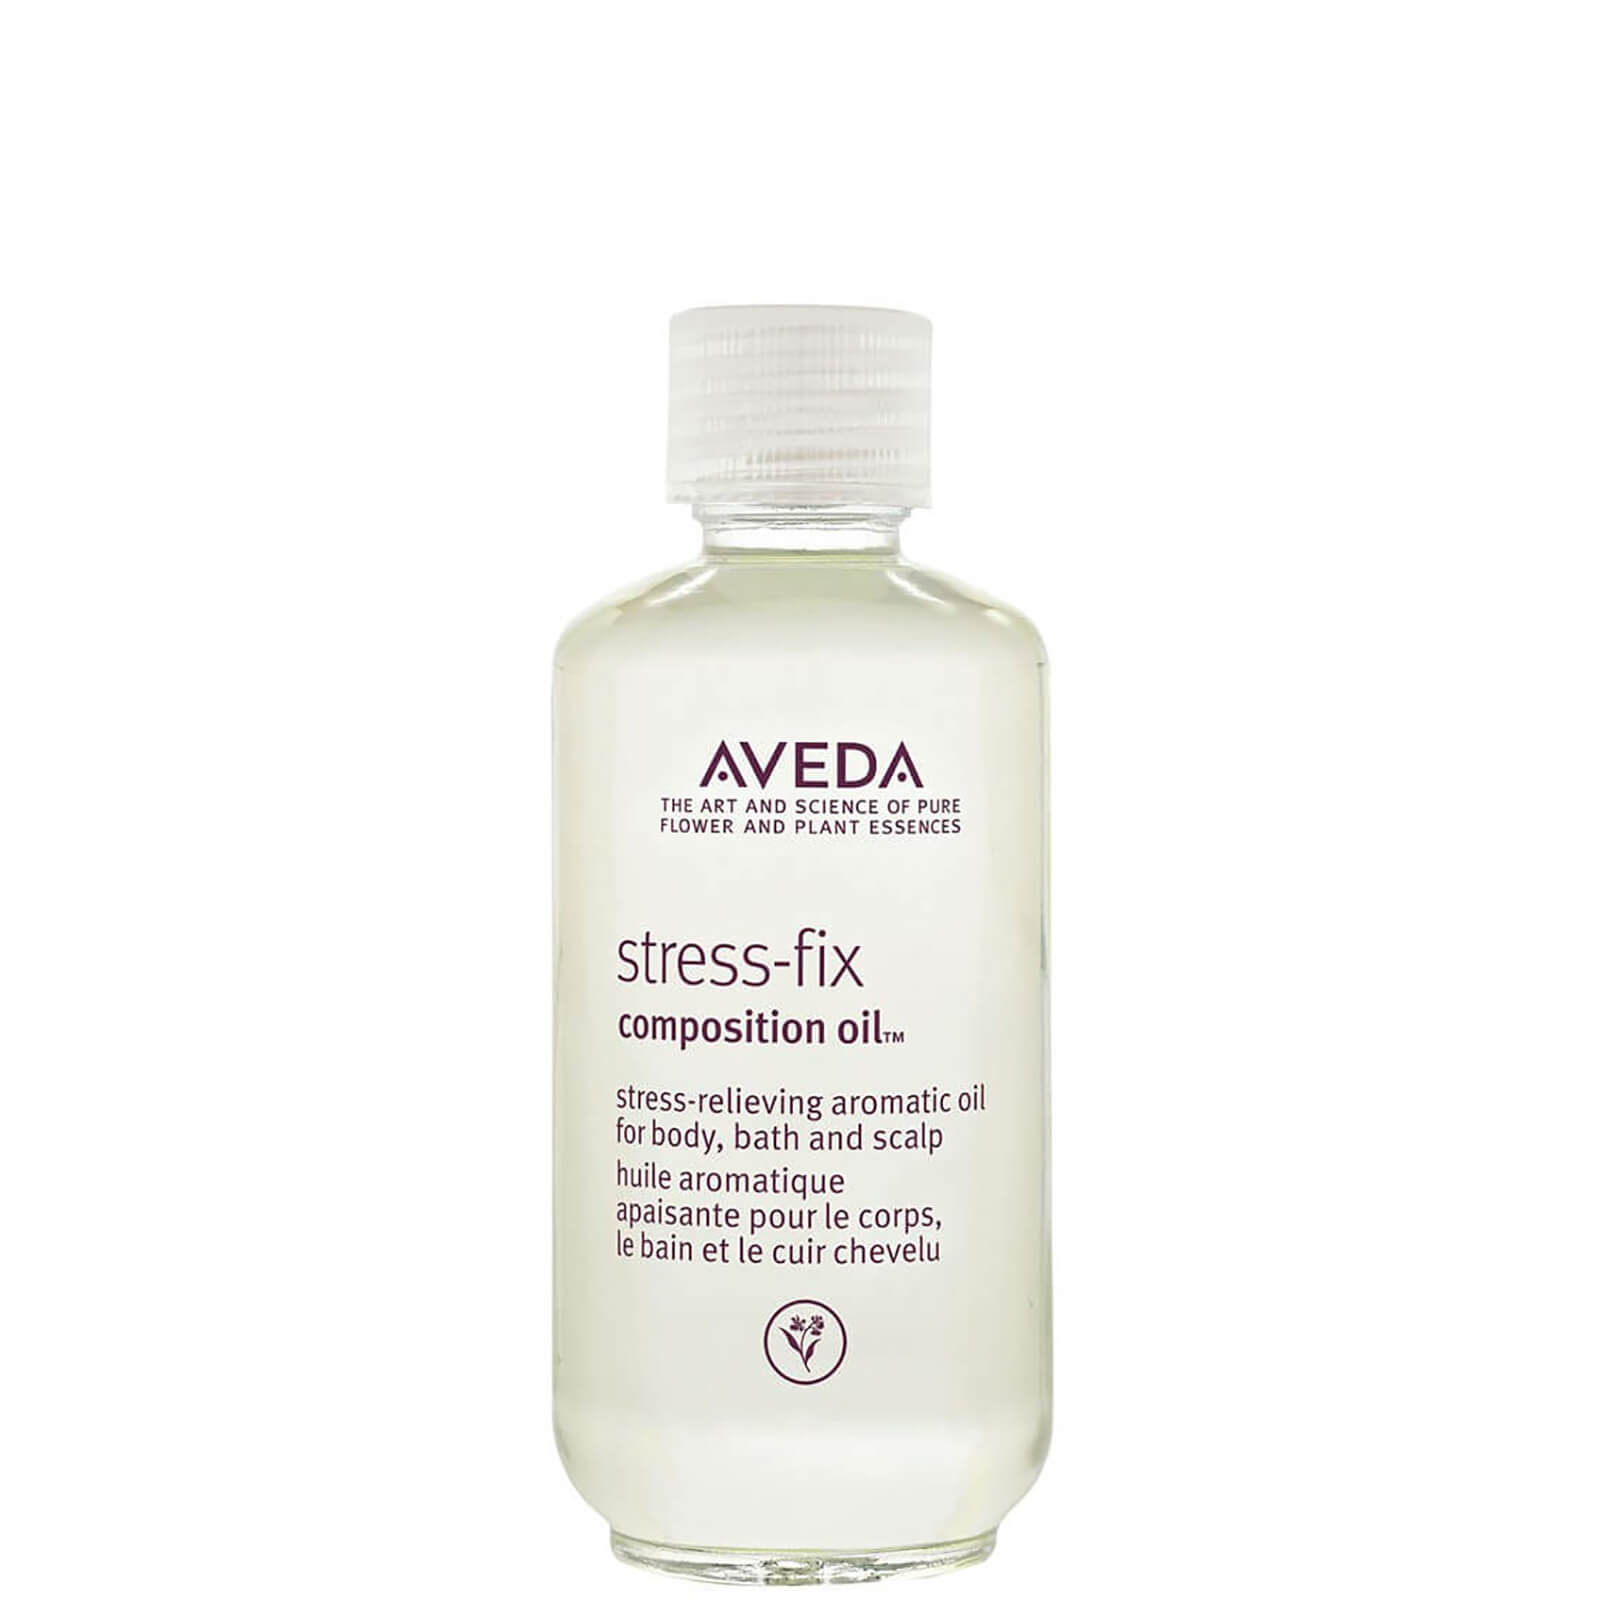 Aceite Aveda Stress Fix Composition Oil (50ml)